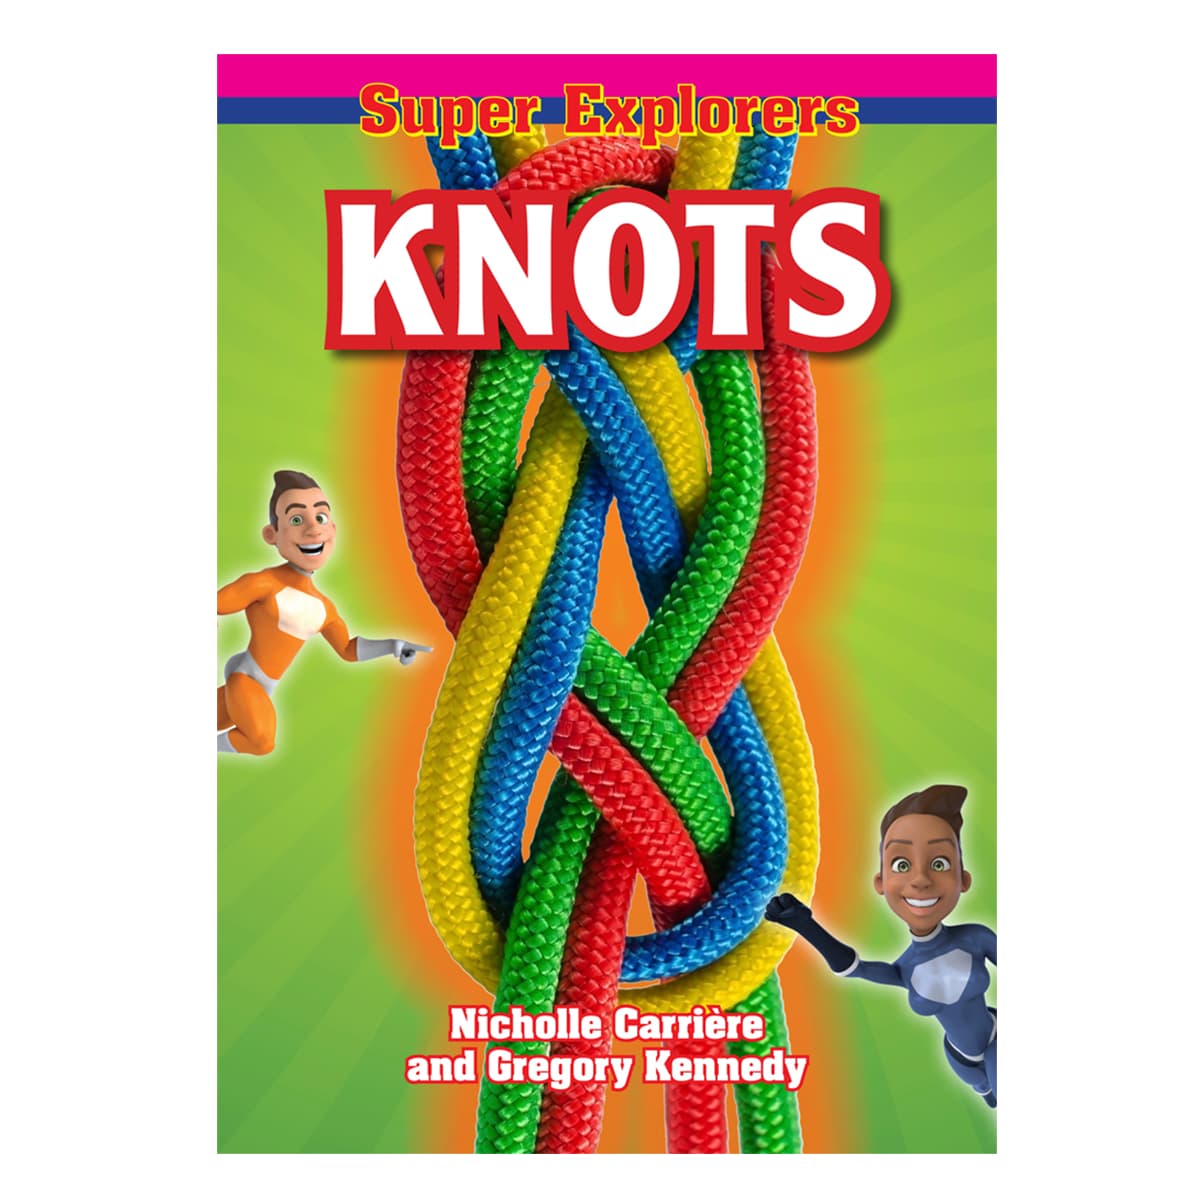 Knots for Kids